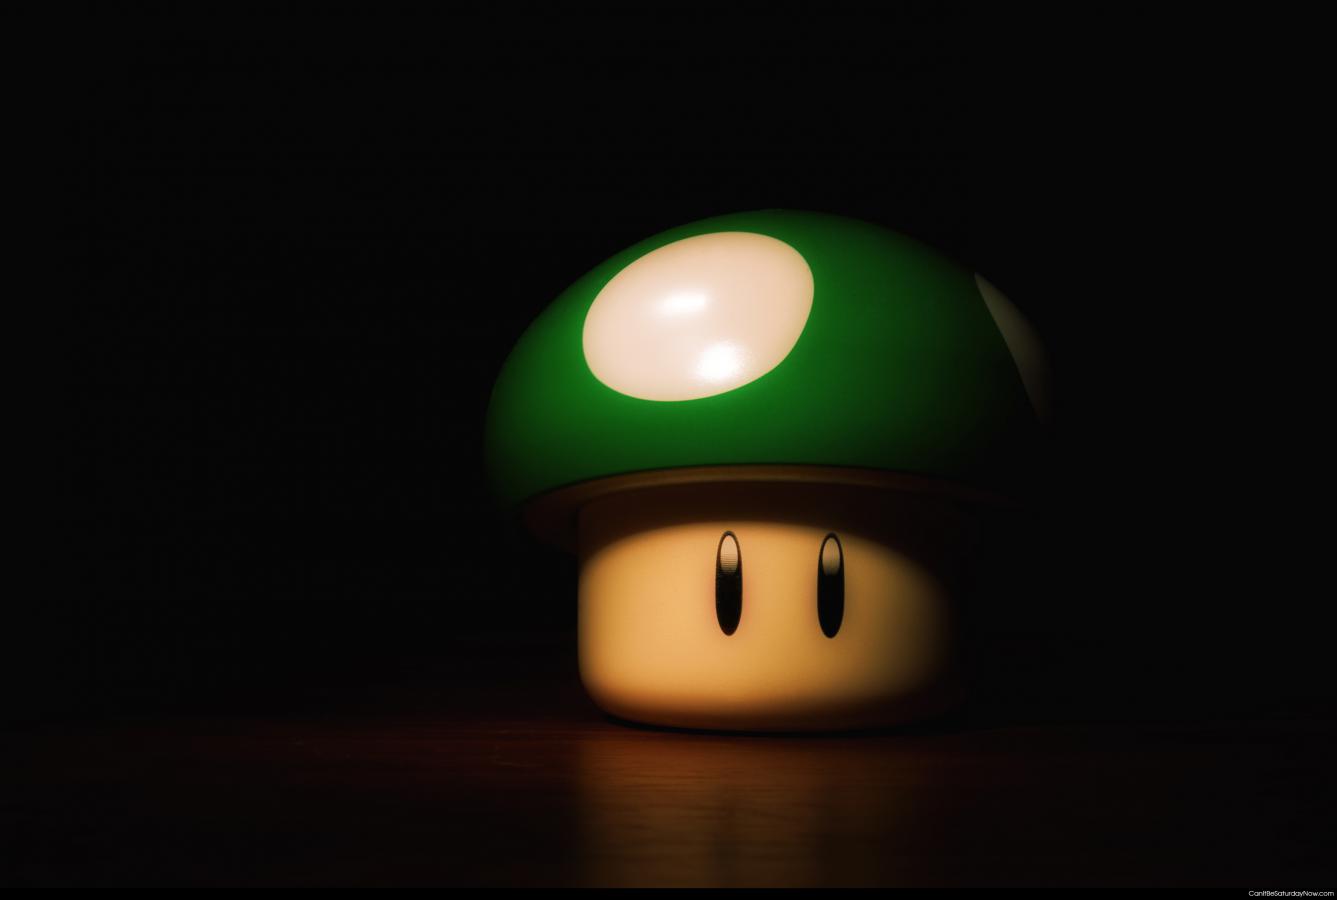 Nice 1up - its what we all need